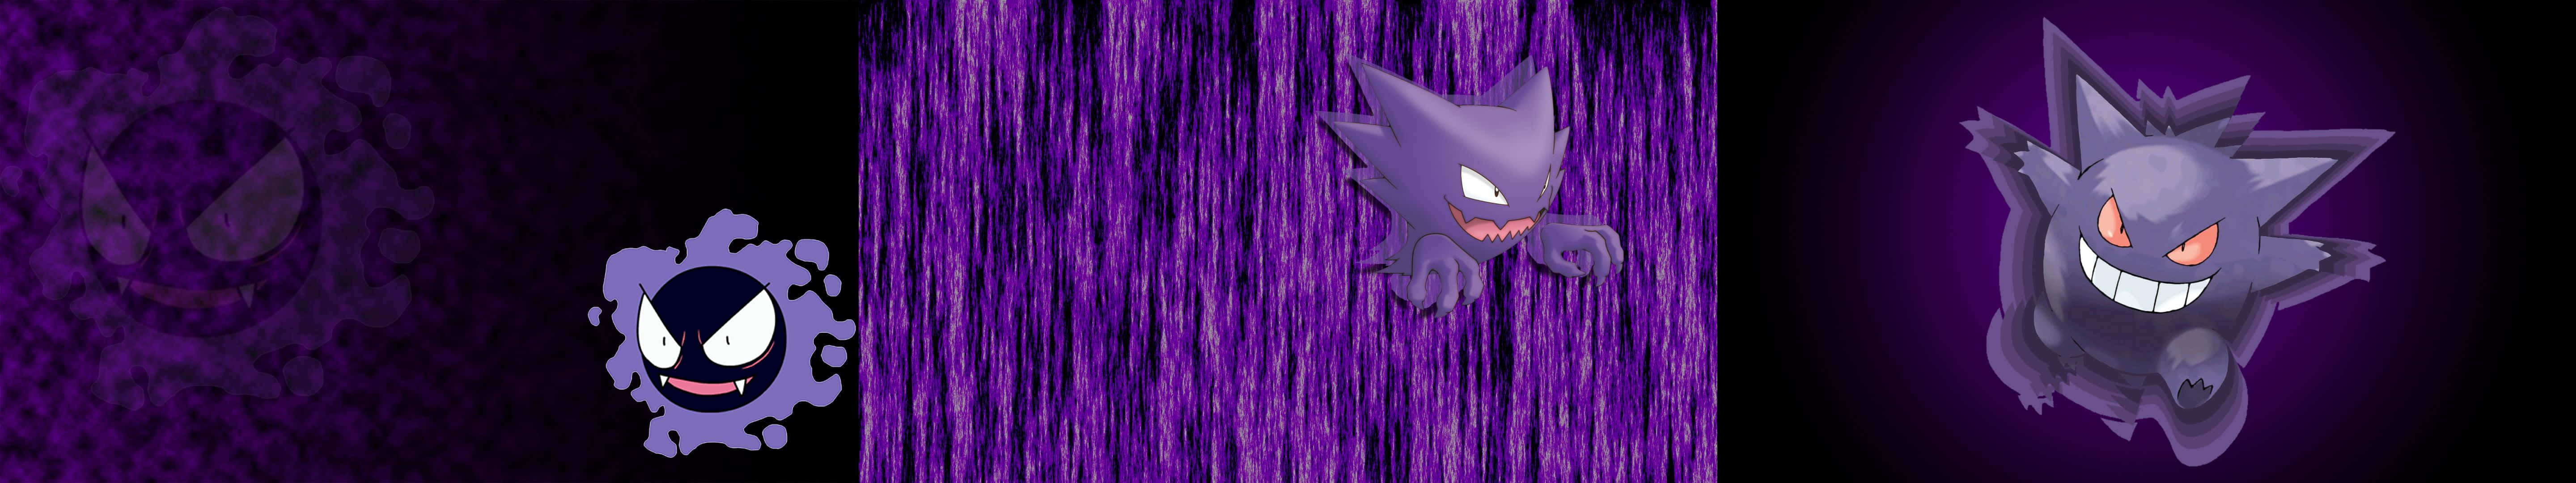 Spooky Shades – An Ensemble of the Ghost Pokemon Wallpaper